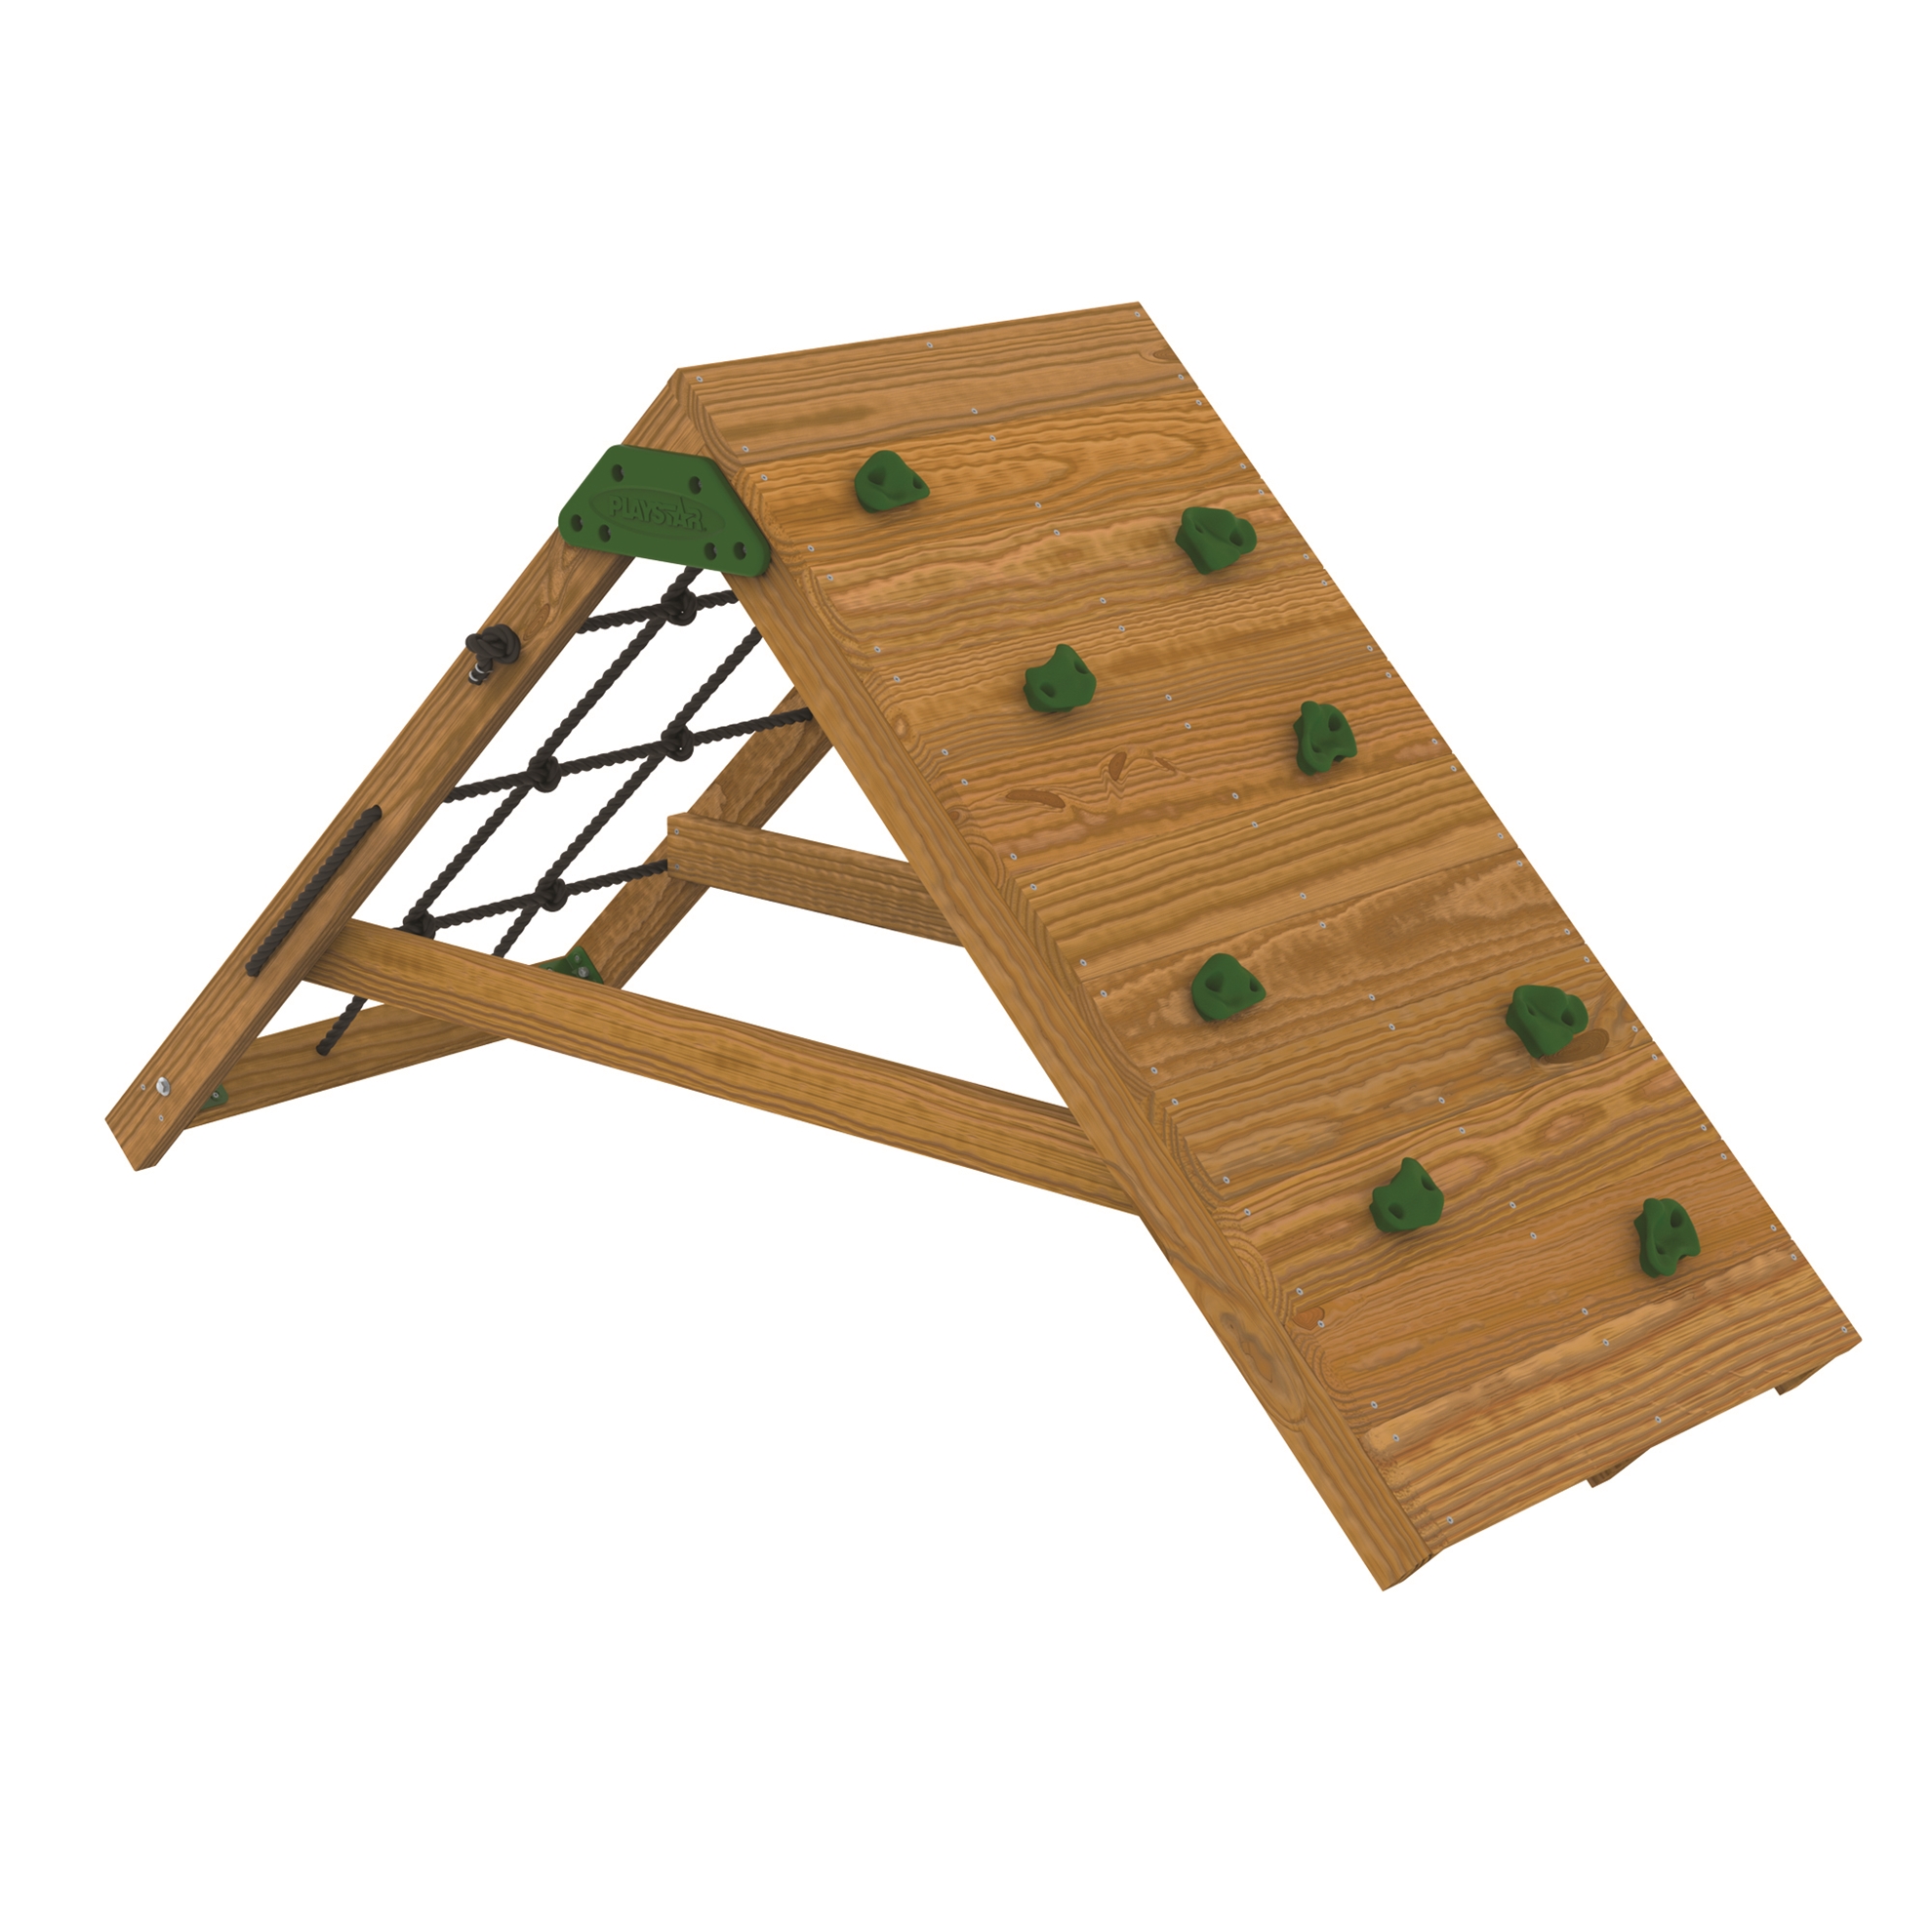 Picture of Ninja Obstacle Kit